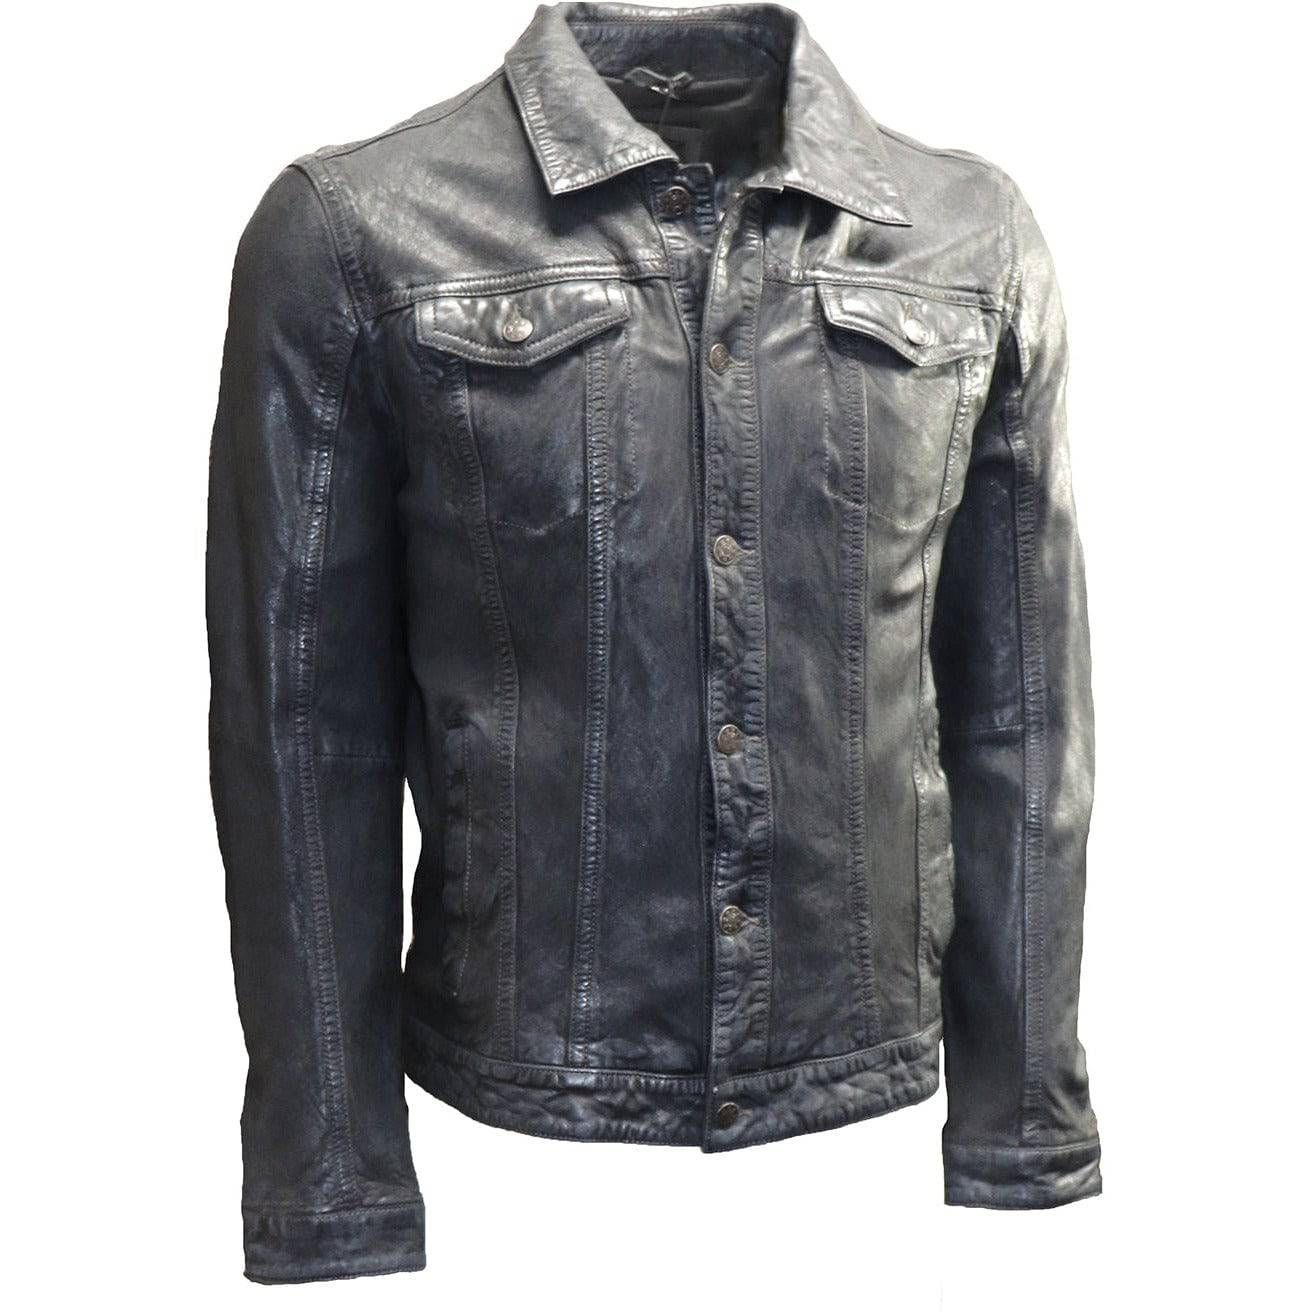 Mauritius Men's Genuine Leather Jean Jacket - Zooloo Leather